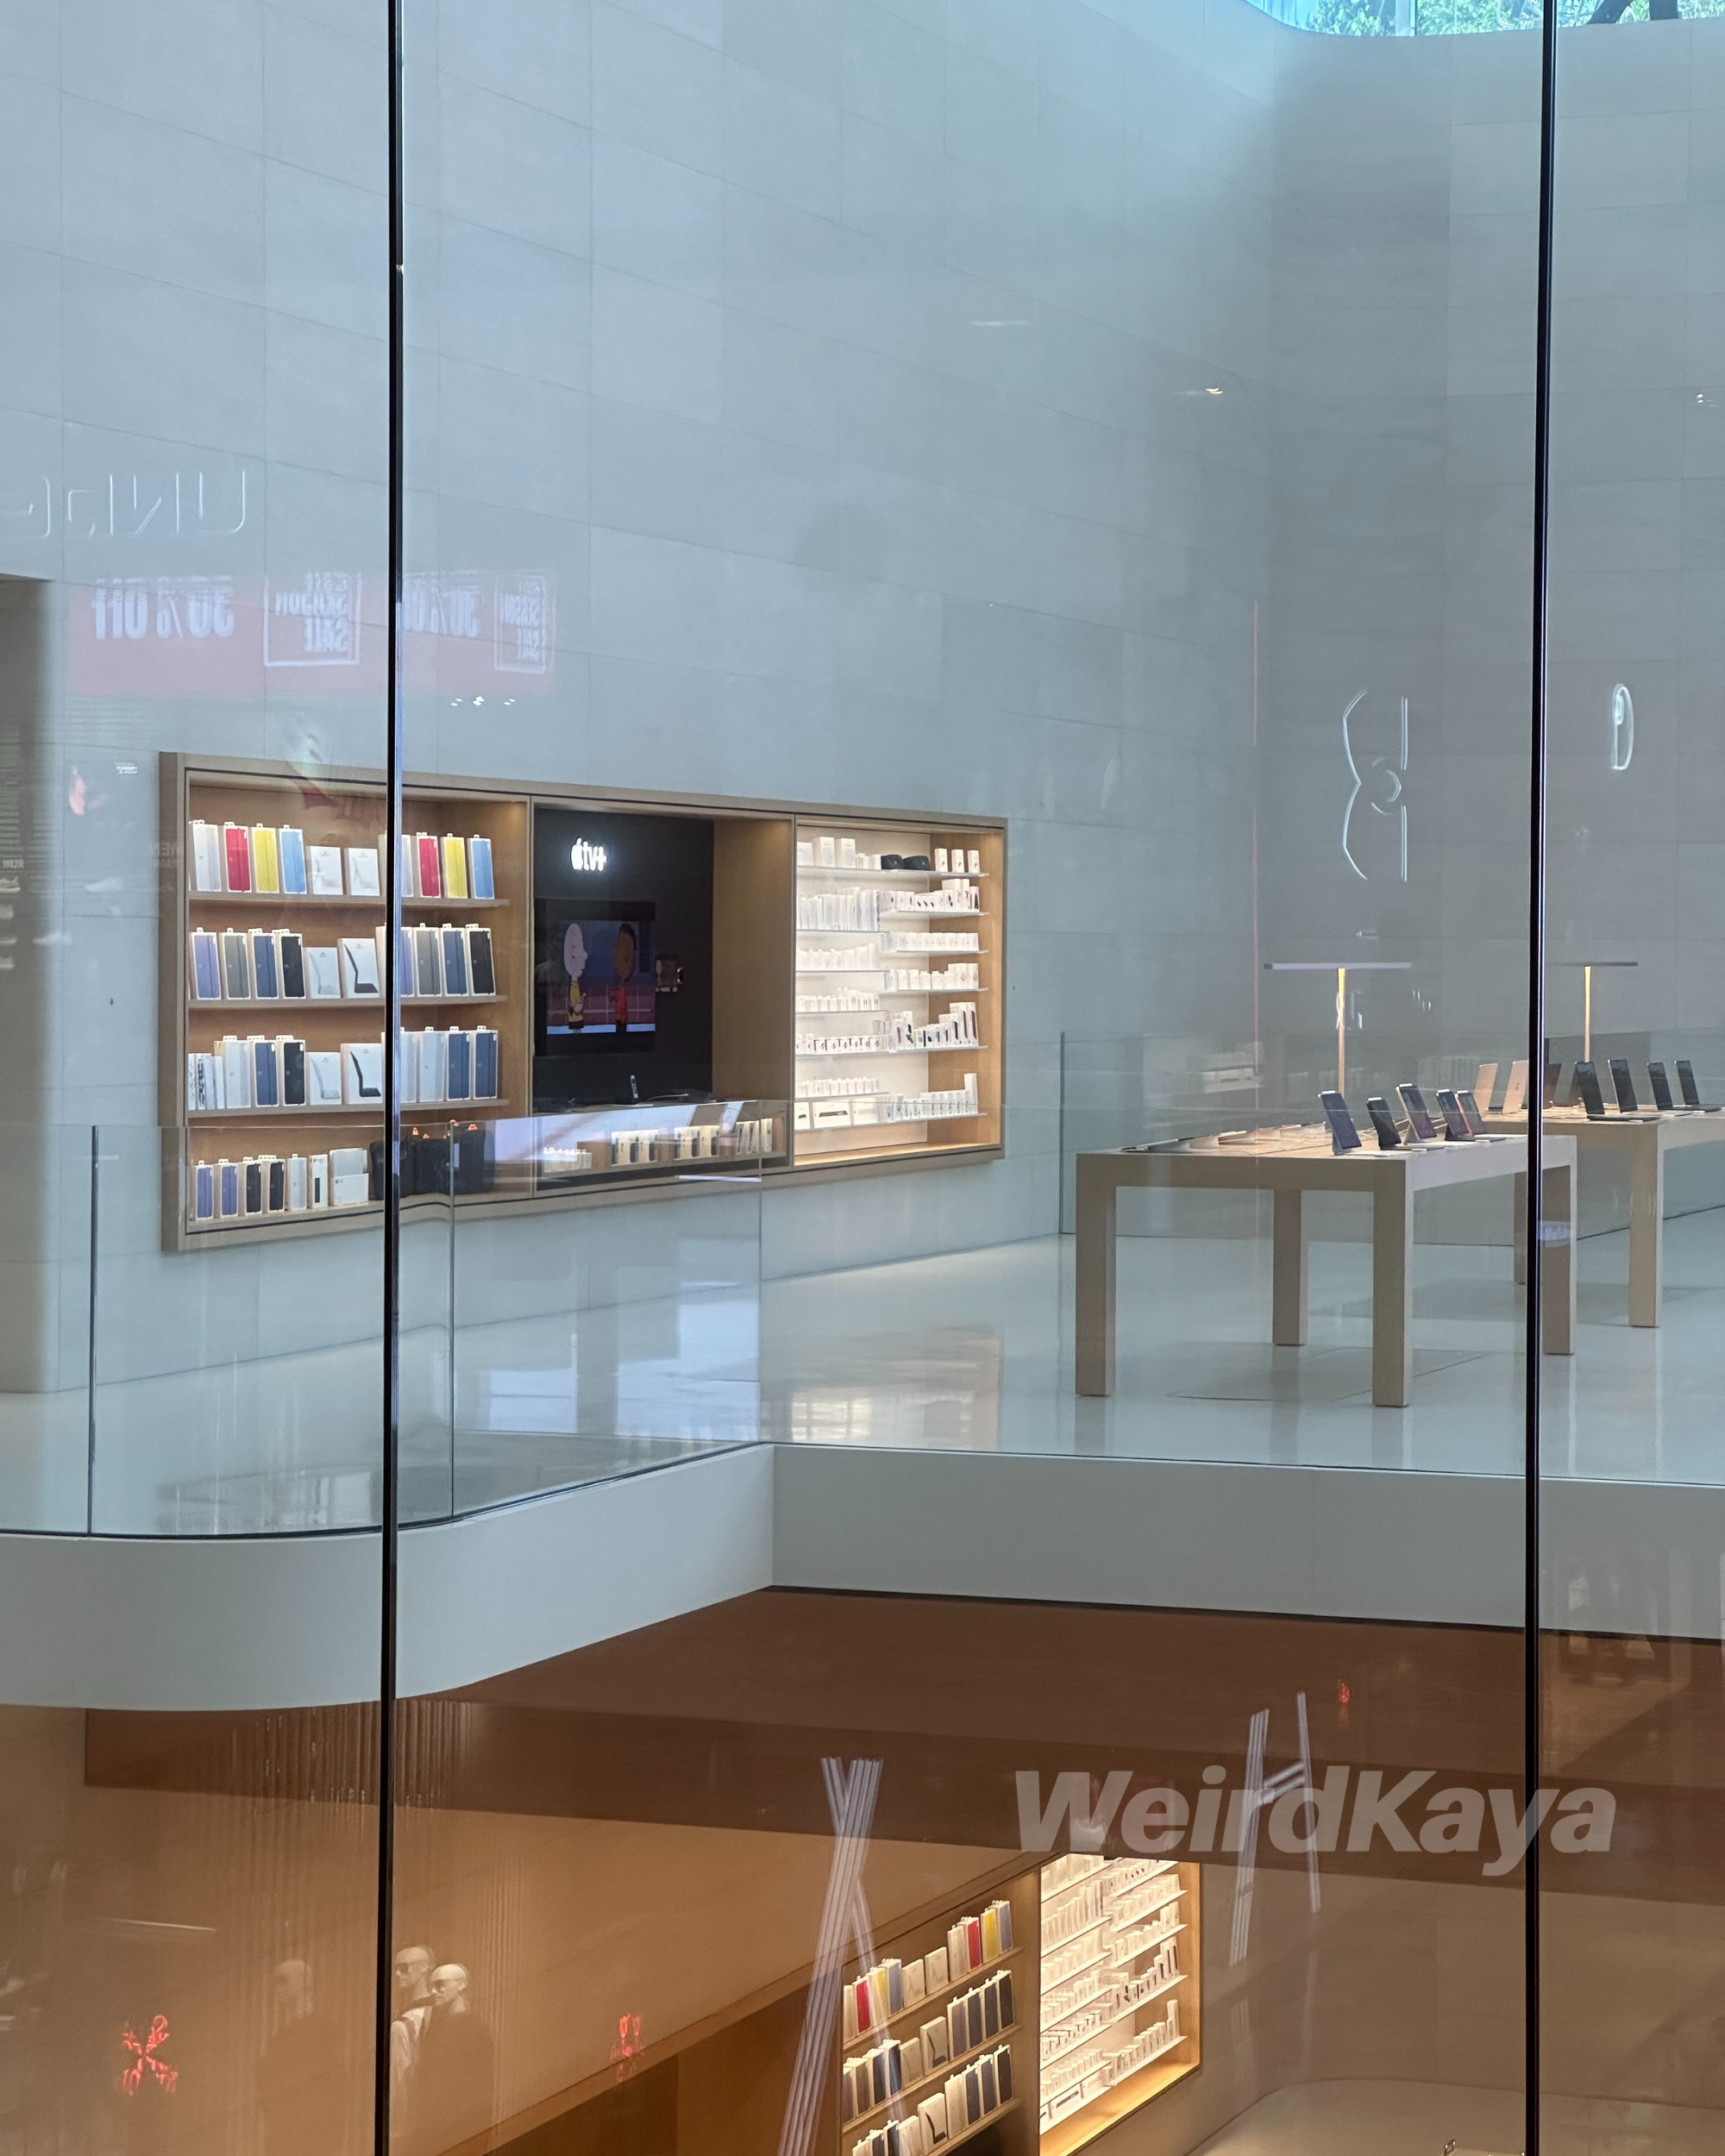 Apple store in malaysia trx 1_second floor